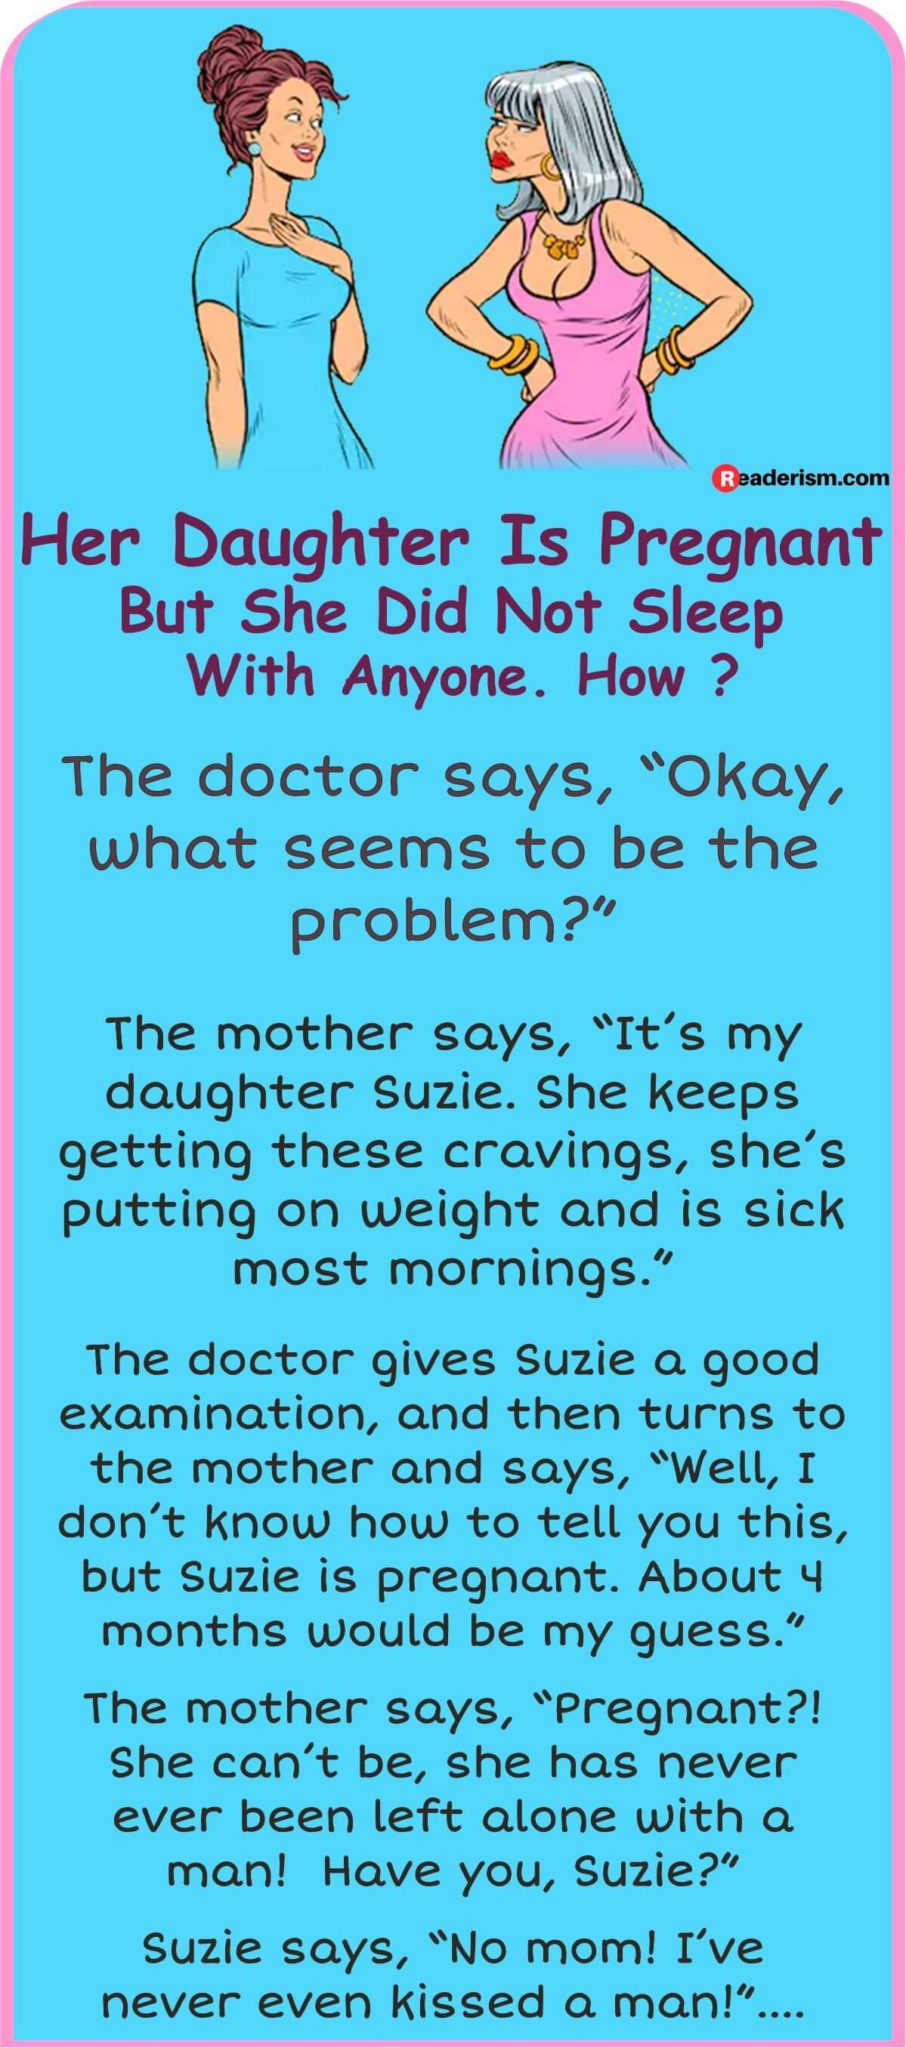 Her daughter is pregnant but she did not sleep with anyone. But How ...